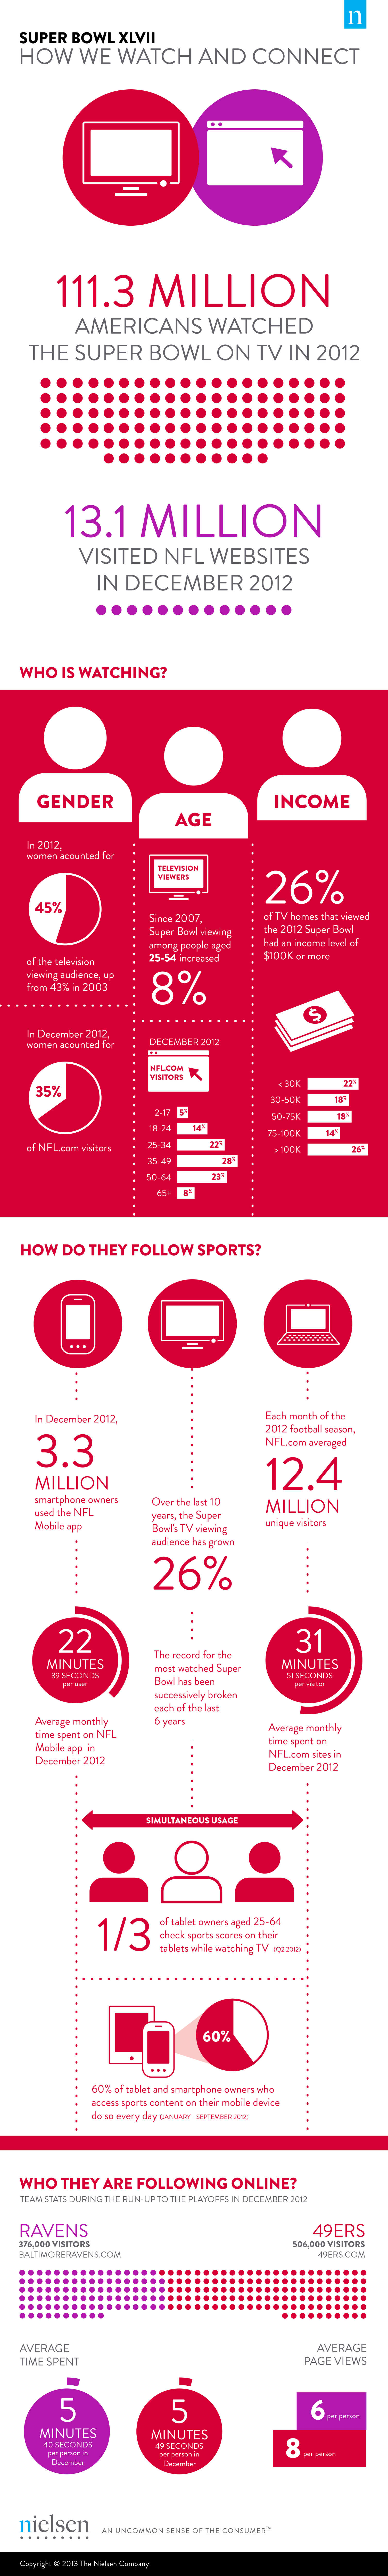 Super Bowl: How We Watch and Connect Infographic